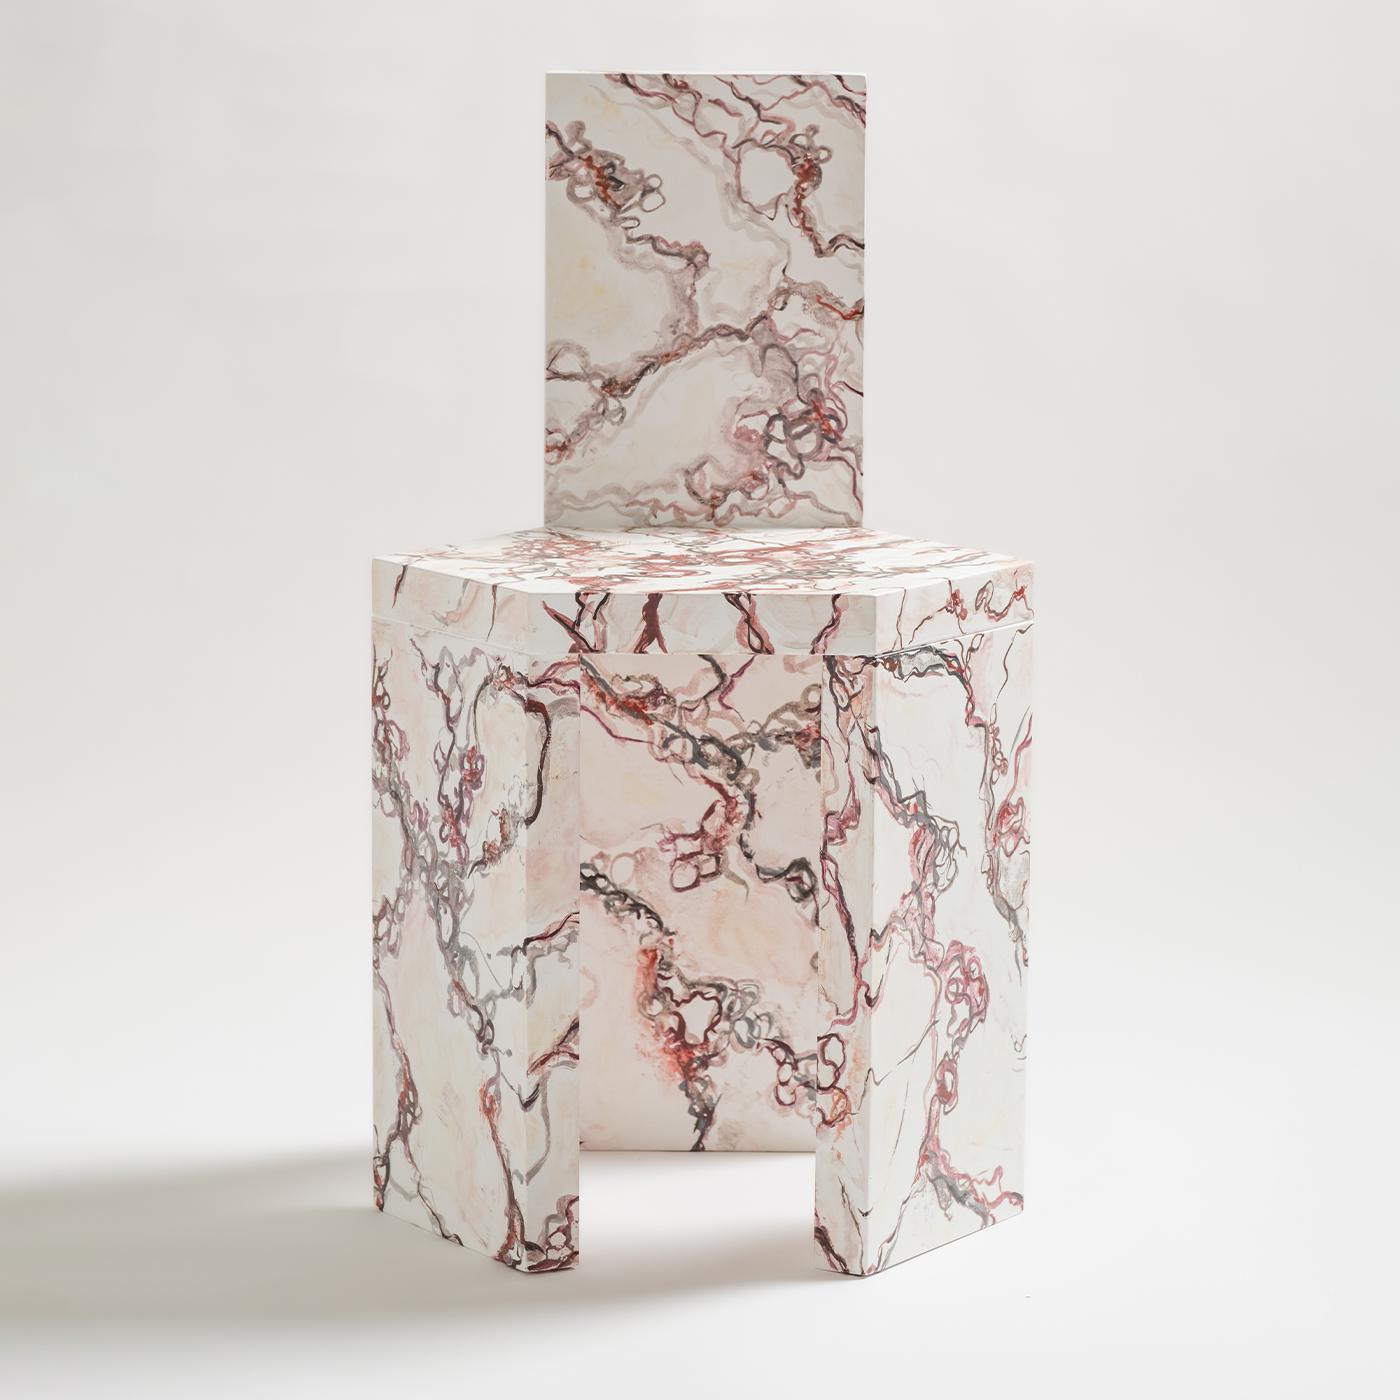 Inspired by prized Italian marbles, this chair is meticulously crafted from the fusion of minimalist design principles and ancient artistic traditions. With 4cm-thick composite elements, this chair is both solid and functional, featuring a wood